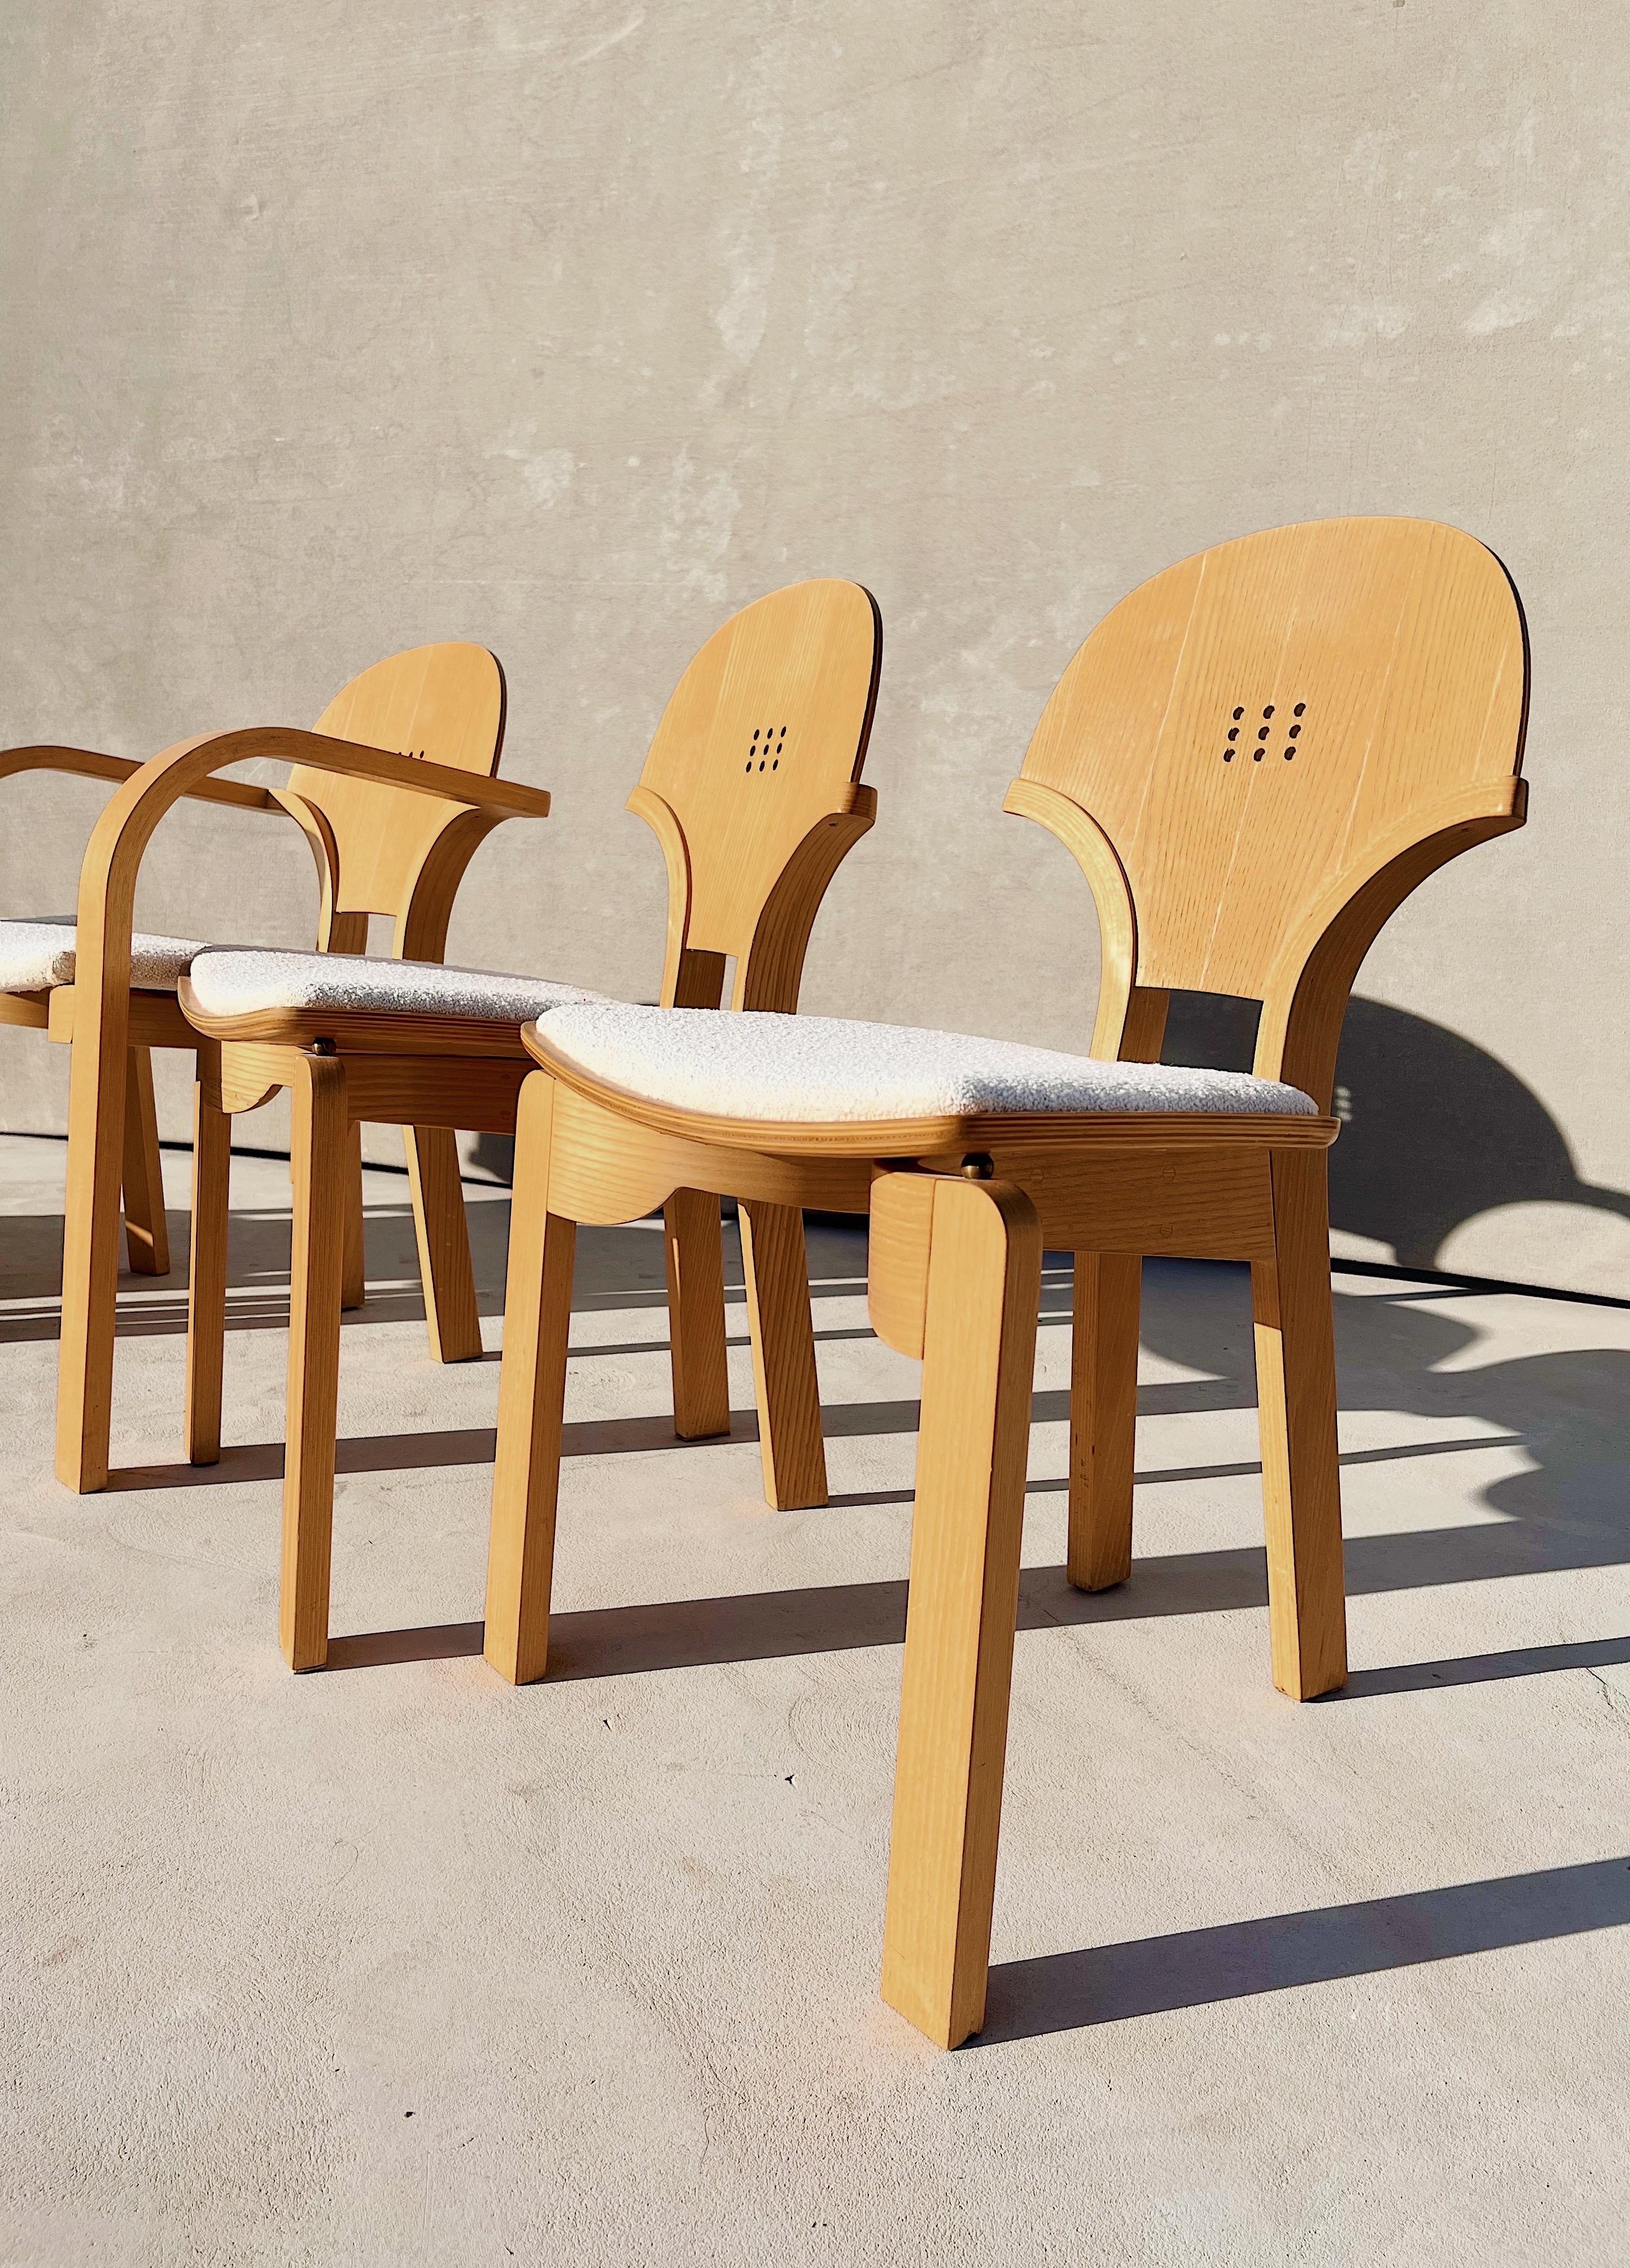 1970s Boucle bentwood dining chairs by Paul Epp - Set of 6

Bentwood dining chairs manufactured in Toronto by Ambient Systems, designed by Paul Epp. 

The Nexus chair, a limited edition design and an incredibly rare find. 
We cannot find any of Paul